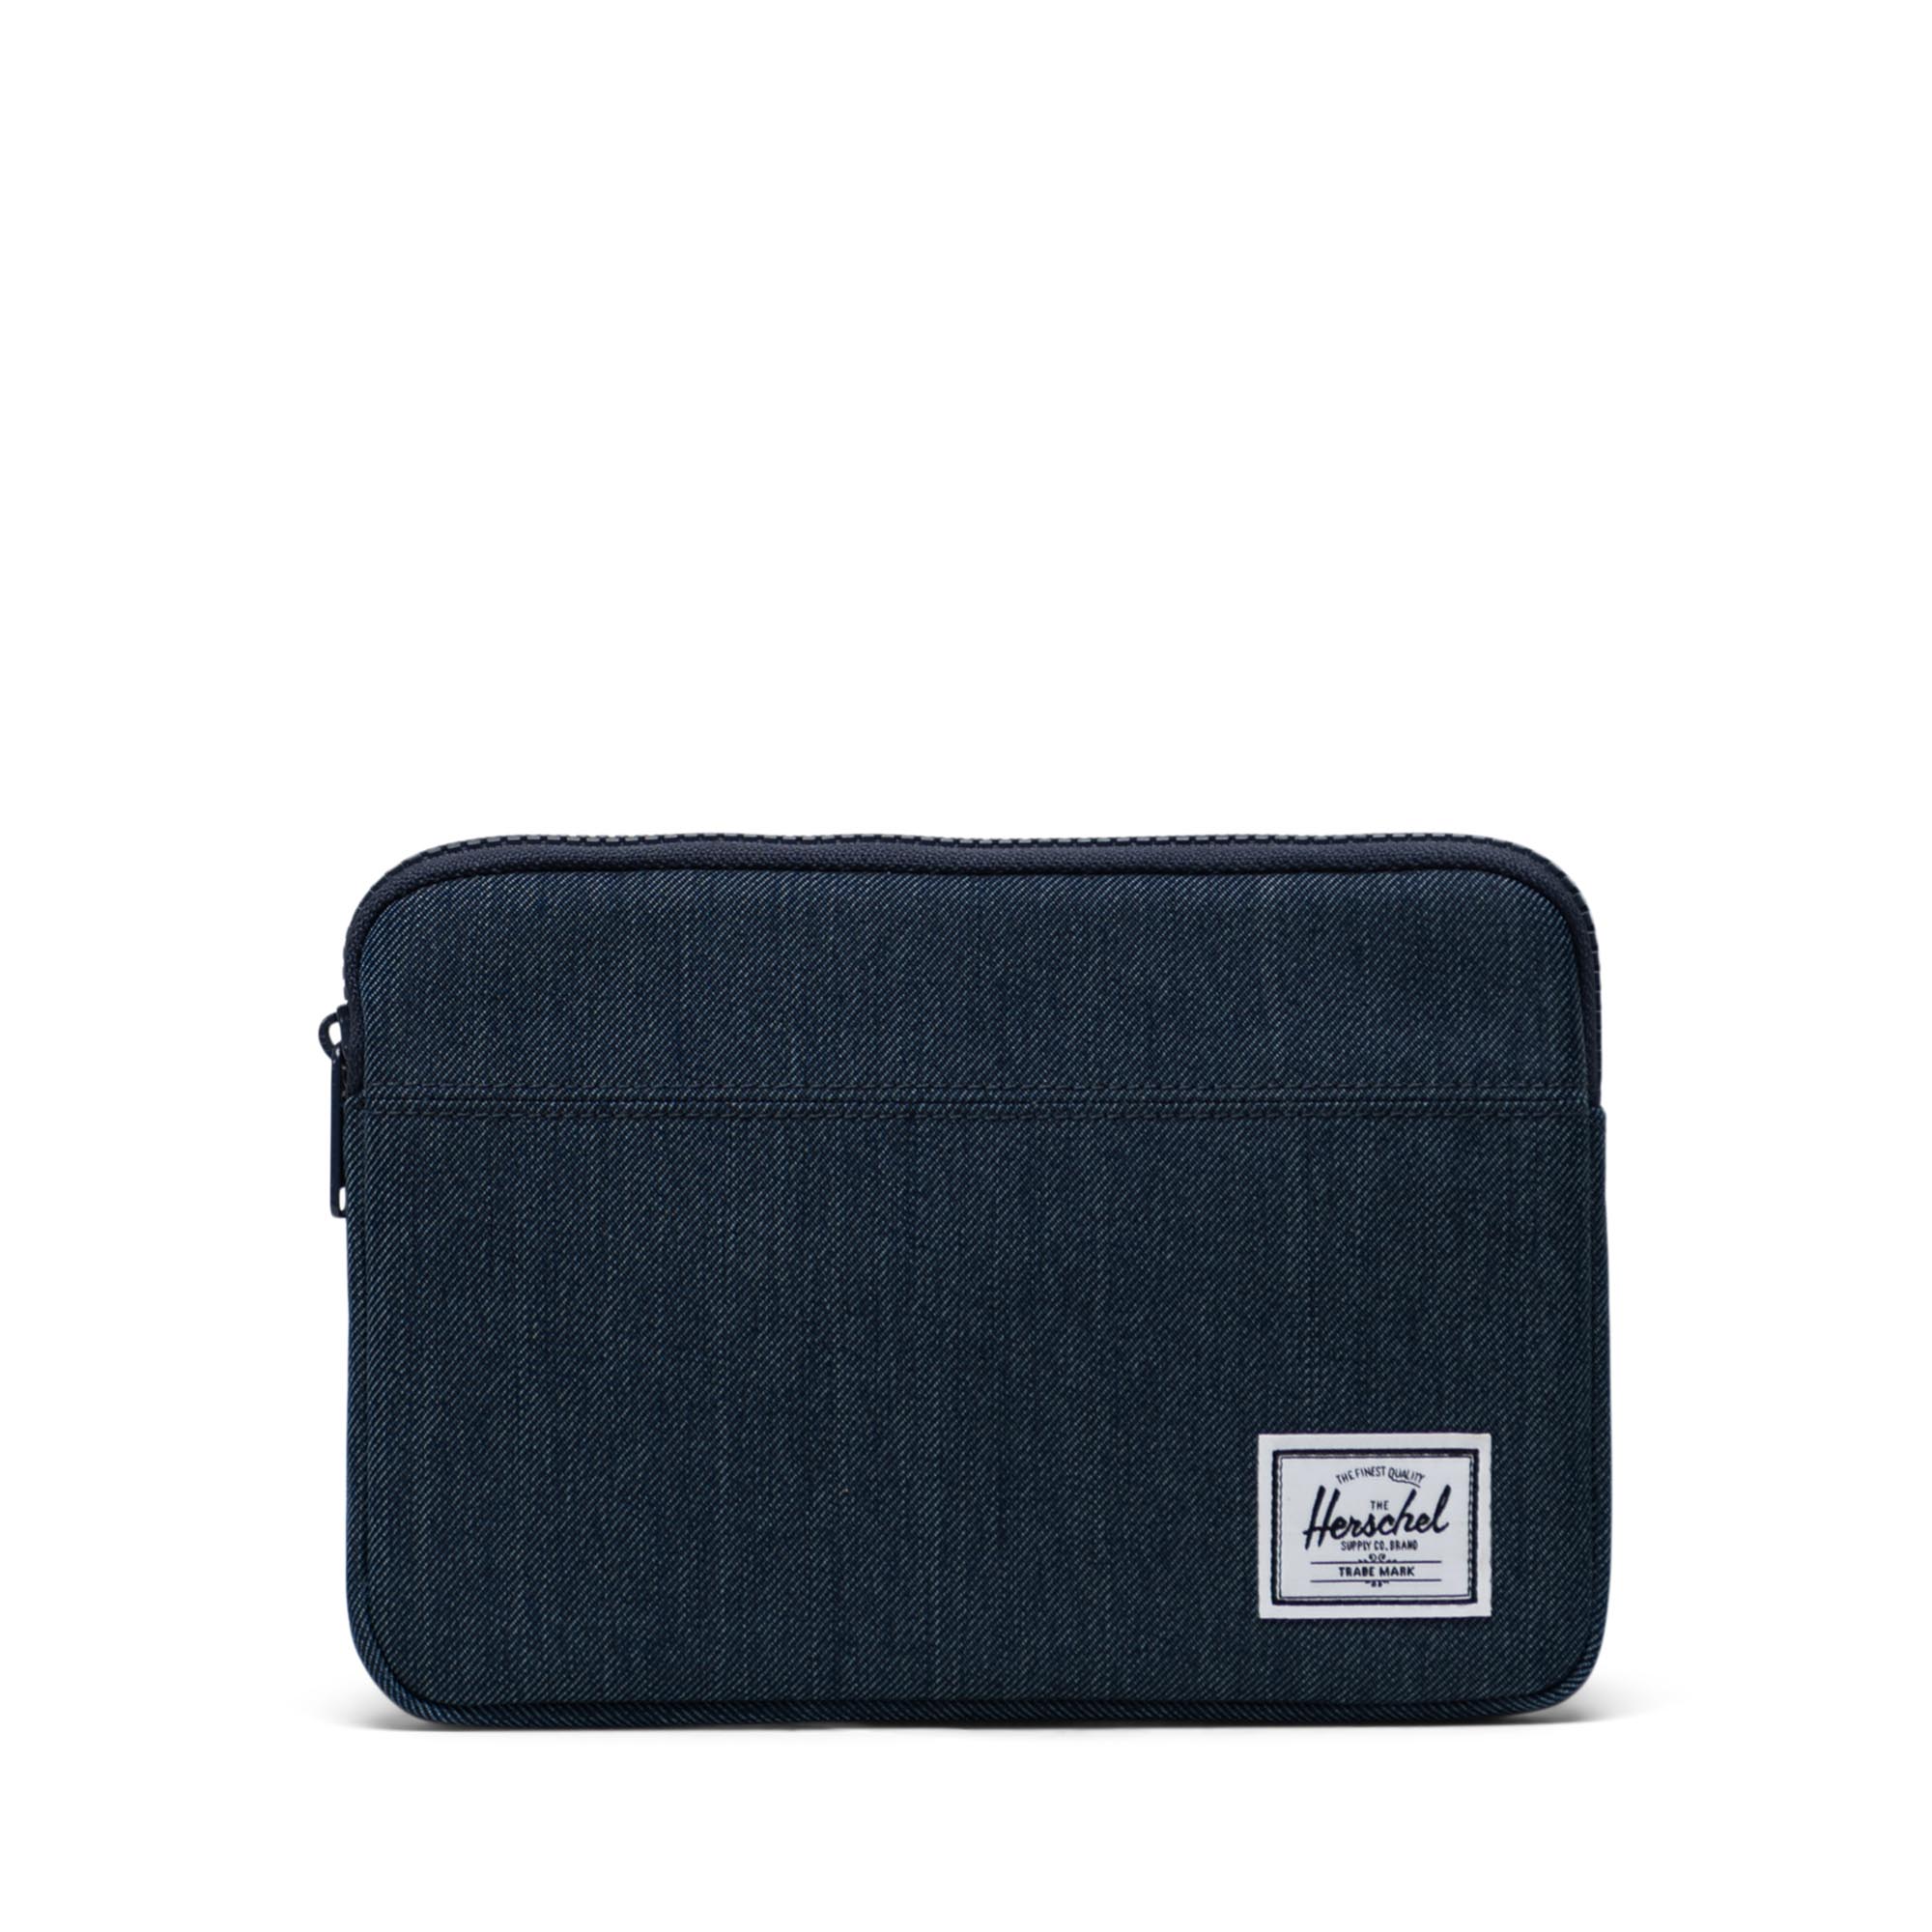 Anchor Tablet Sleeve 8 Inch | Herschel Supply Company